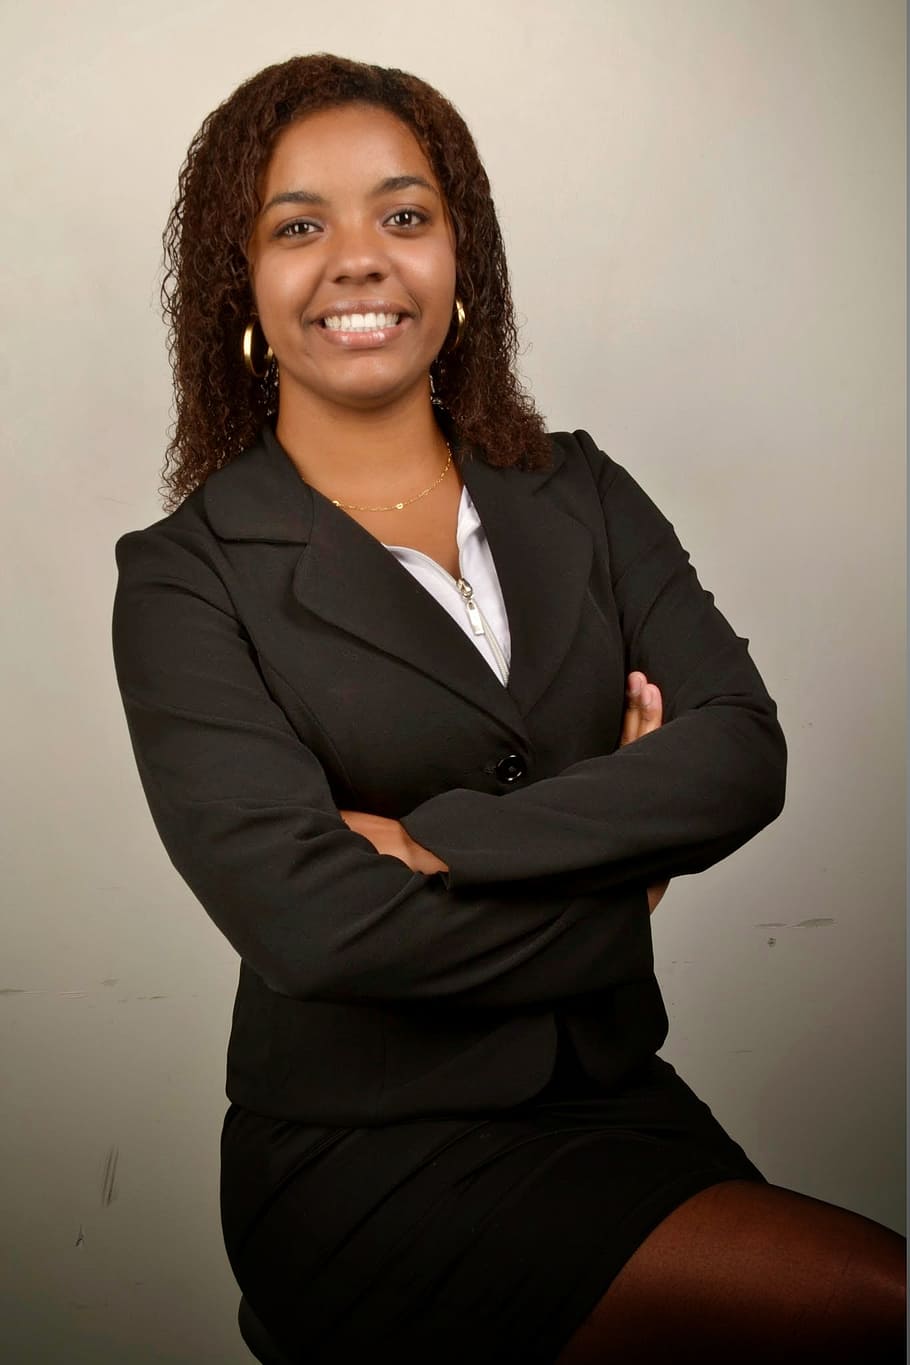 smiling woman wearing black suit, businesswoman, young, accounting